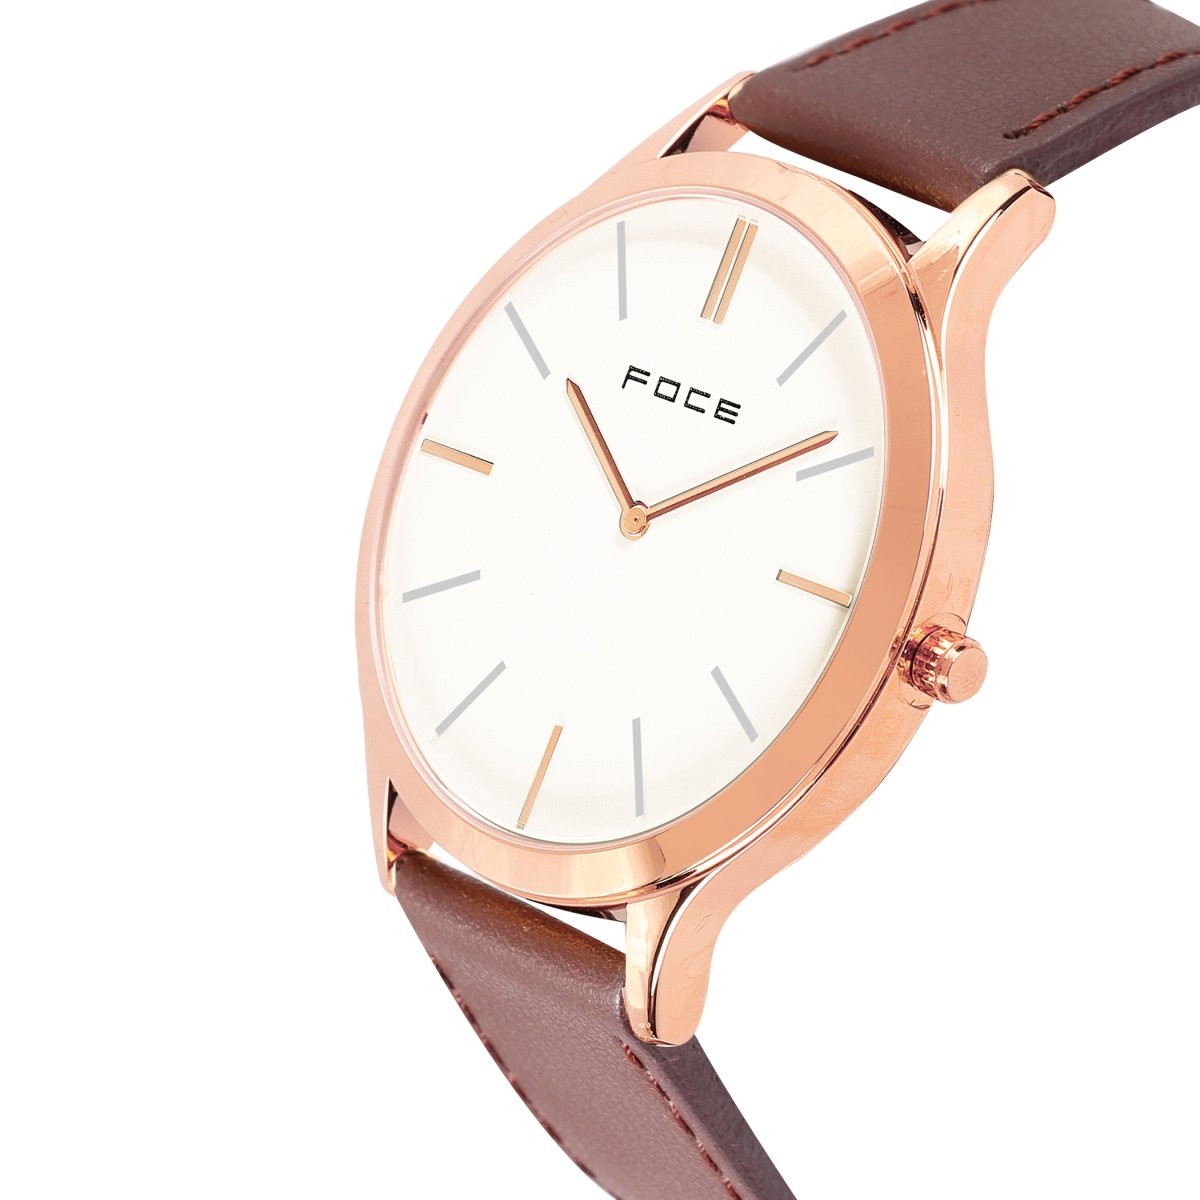 FOCE Analog White Dial Leather Strap Watch For Couple-FC-P-9760115